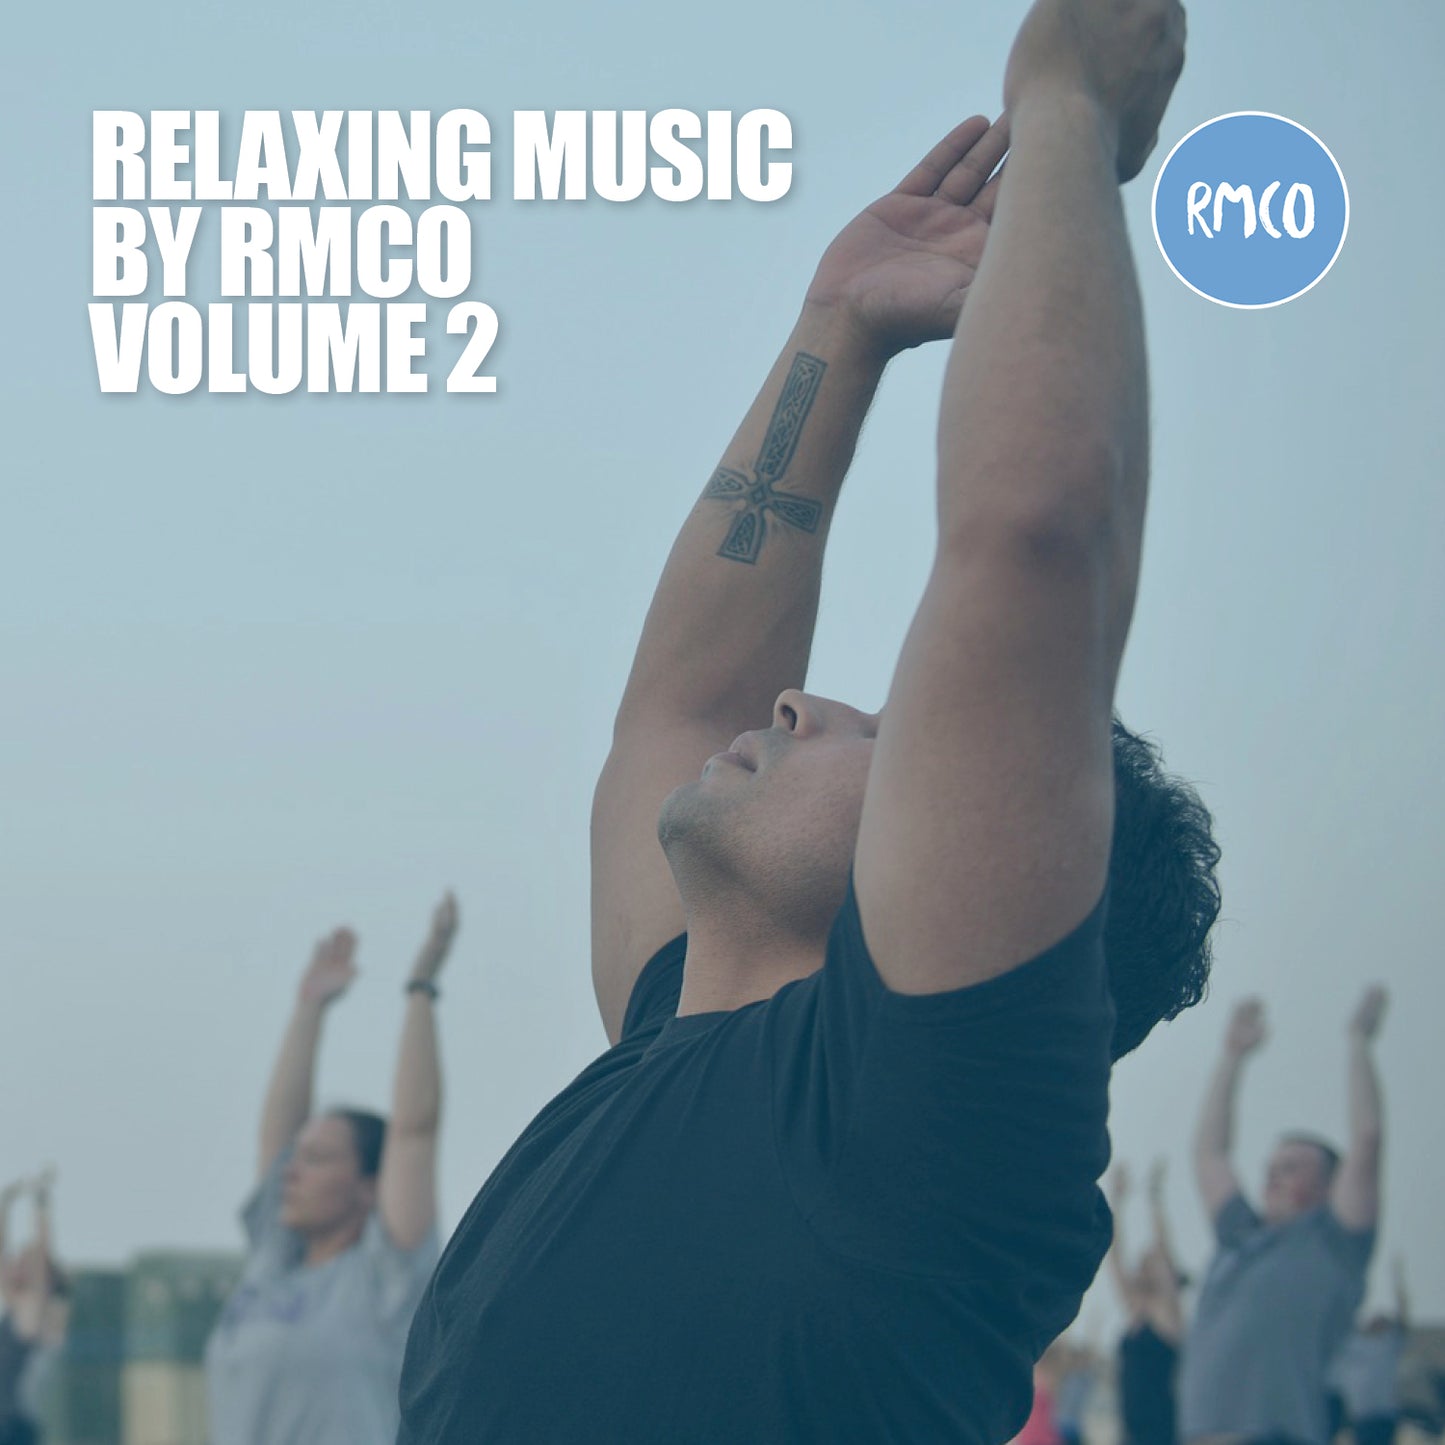 Relaxing Music, Vol. 2 by RMCO